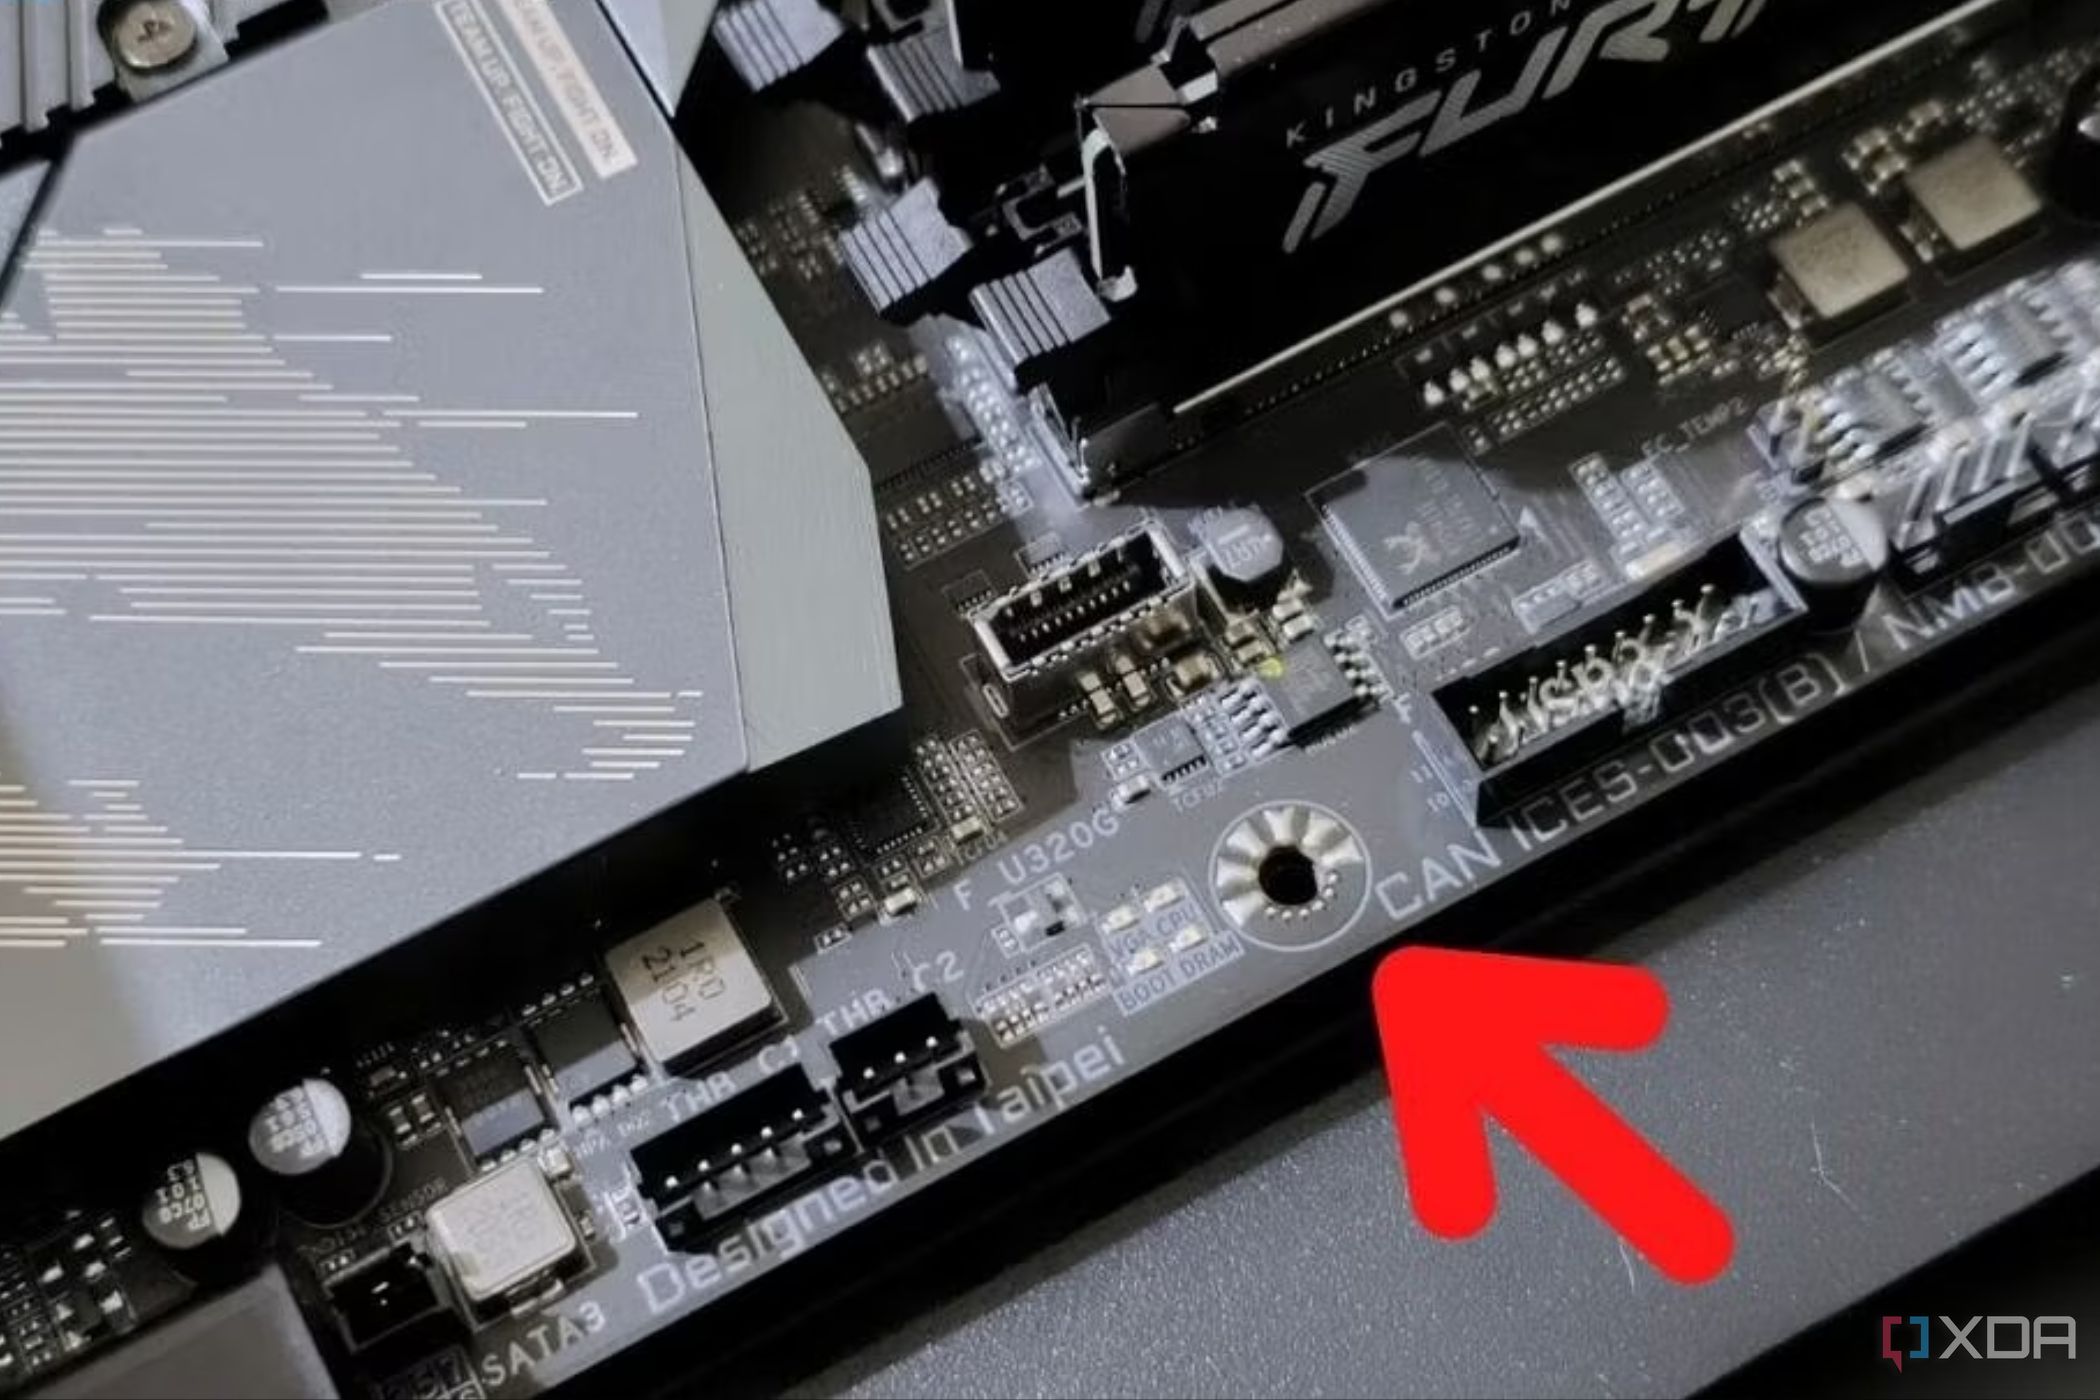 An image showing the highlighted standoff hole on a motherboard.